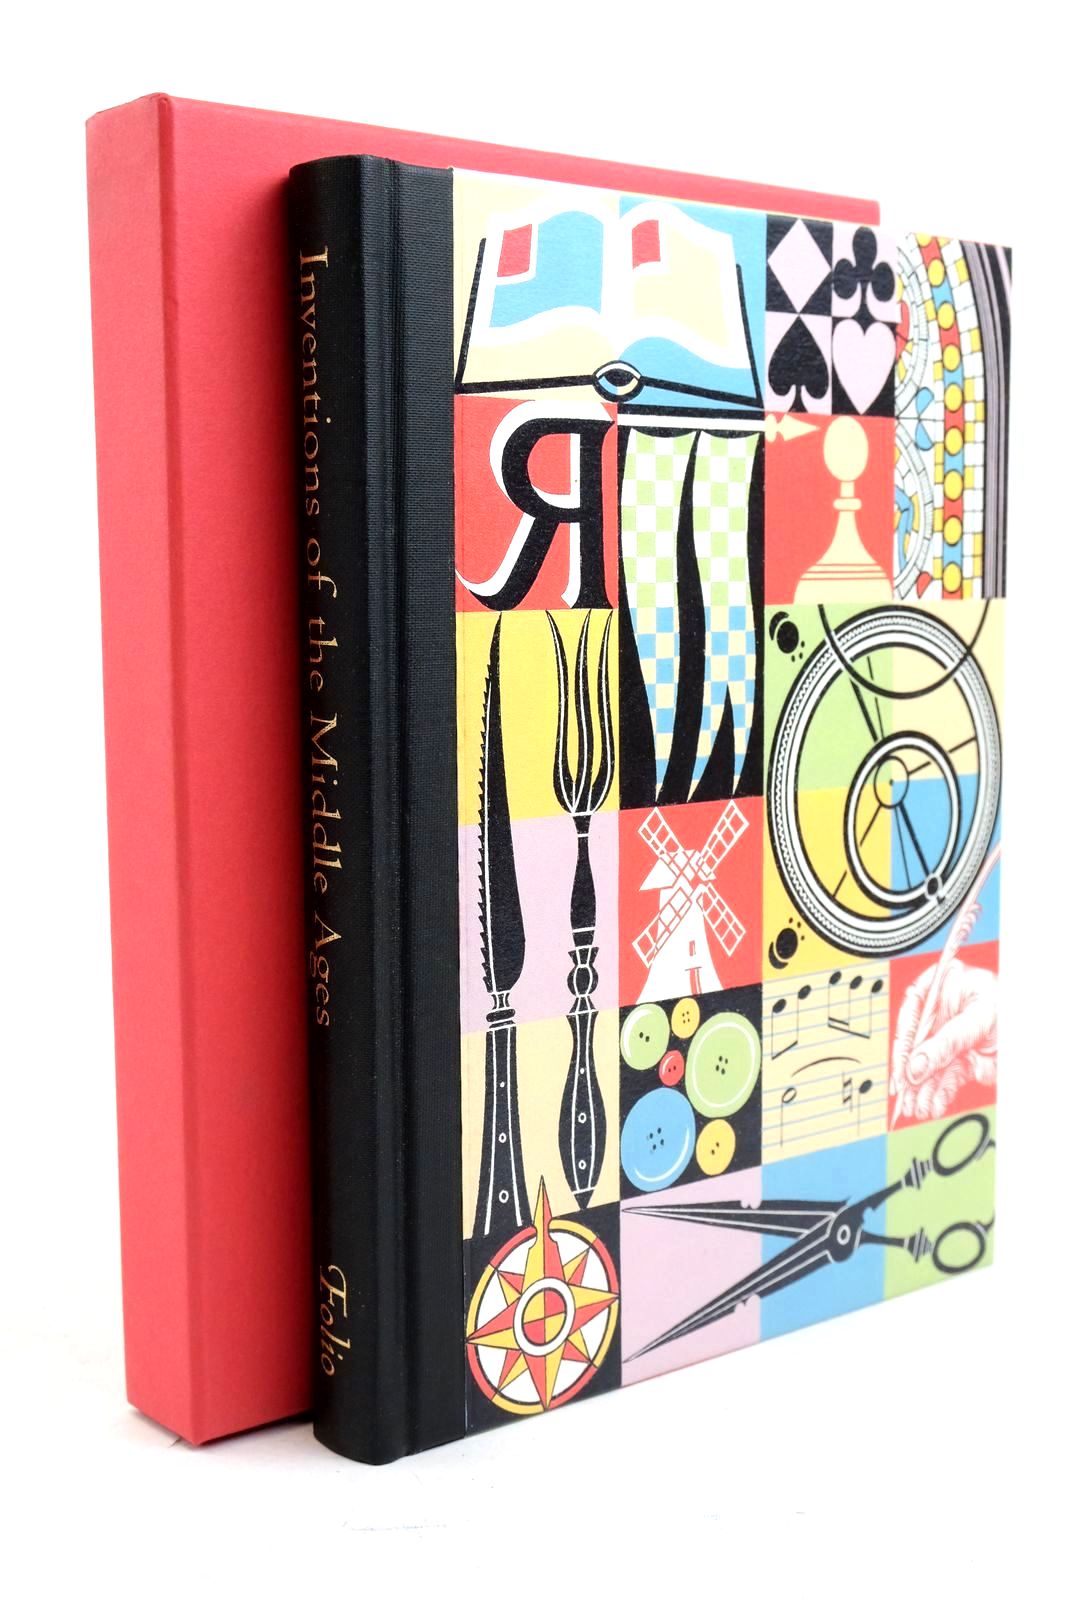 Photo of INVENTIONS OF THE MIDDLE AGES written by Frugoni, Chiara published by Folio Society (STOCK CODE: 1321051)  for sale by Stella & Rose's Books